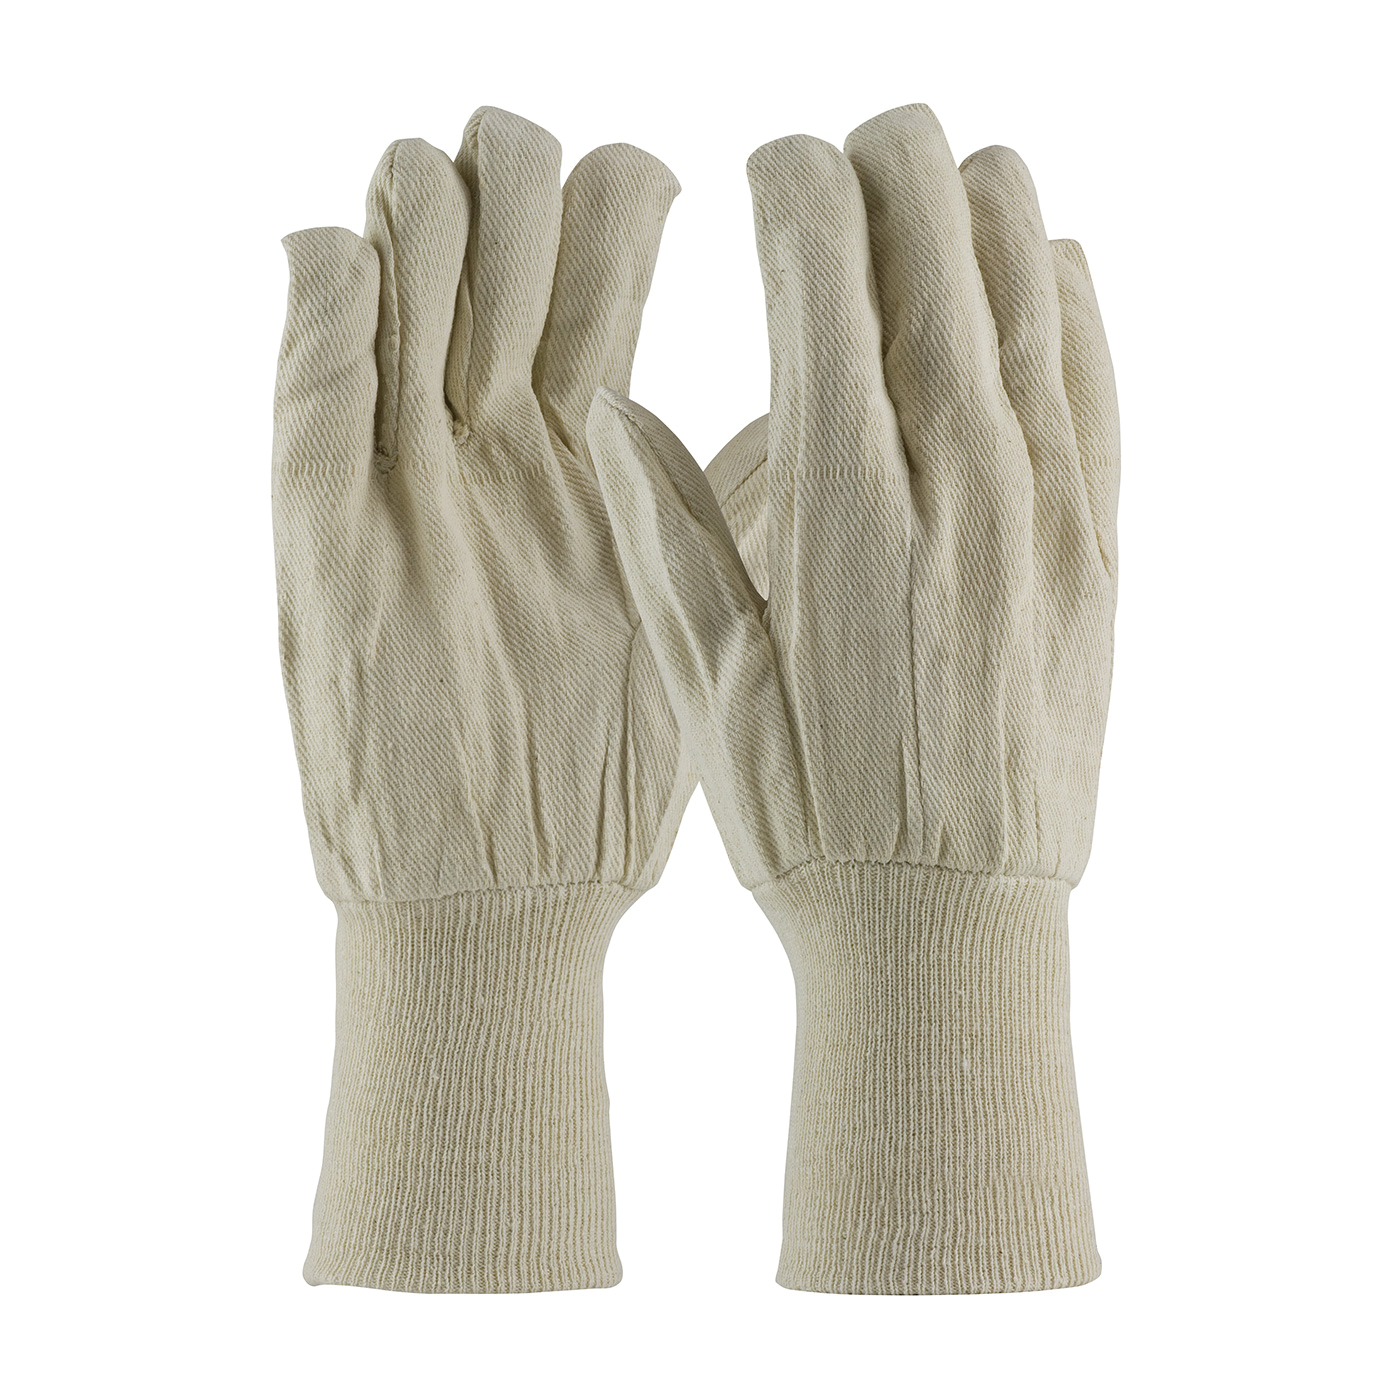 PIP® 90-908/5KW Men's Premium Grade General Purpose Gloves, Multi-Purpose/Work, Clute Cut/Full Finger/Straight Thumb Style, Cotton/Canvas Palm, Cotton Canvas, Natural, Knit Wrist/Extended Cuff, Uncoated Coating, Canvas Lining